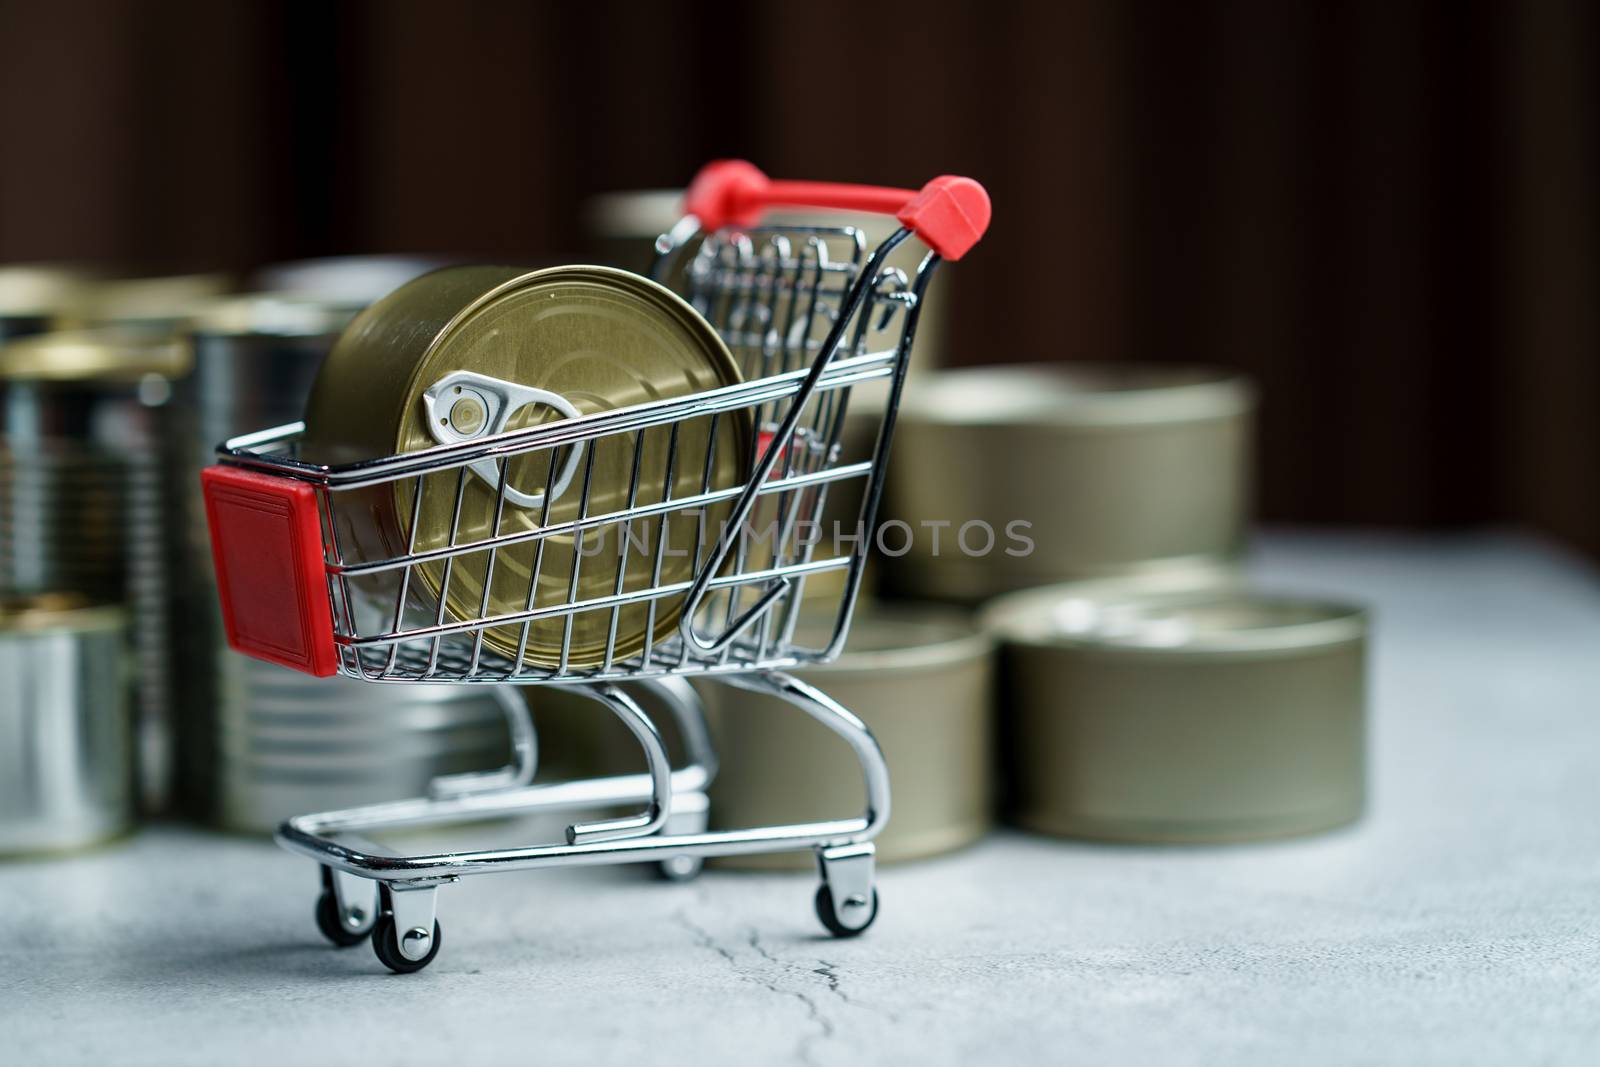 Canned food in shopping cart toy with group of Aluminium canned food.